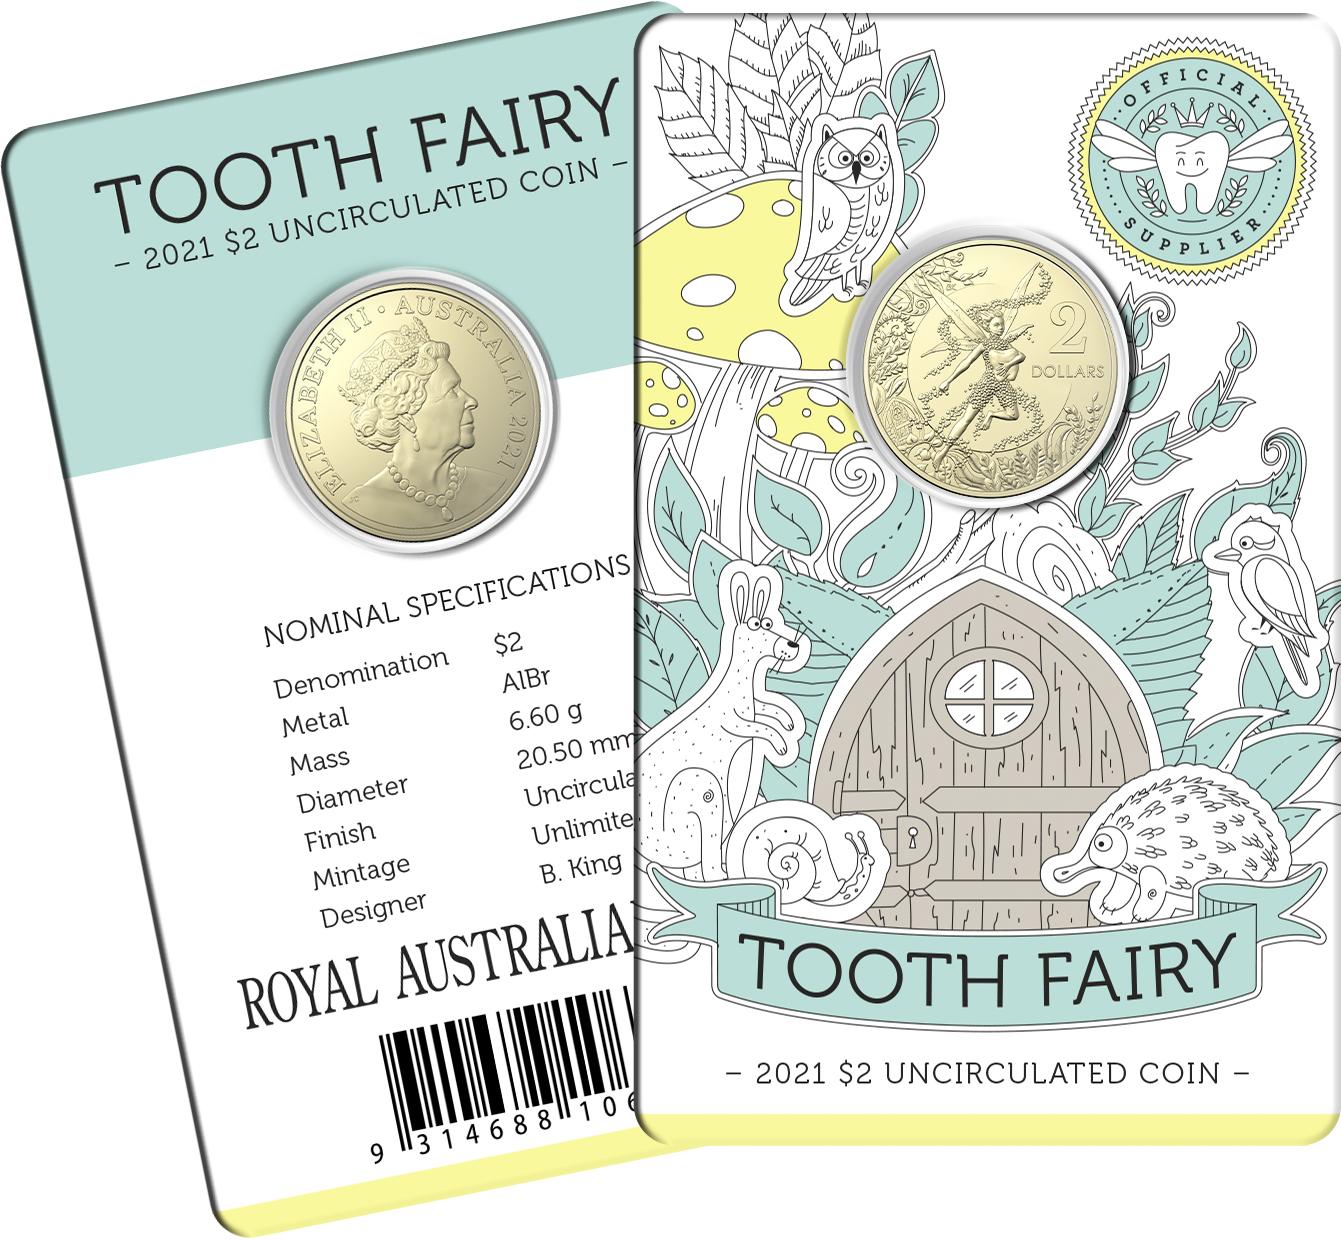 2021 Tooth Fairy $2 AlBr Uncirculated Coin in Card